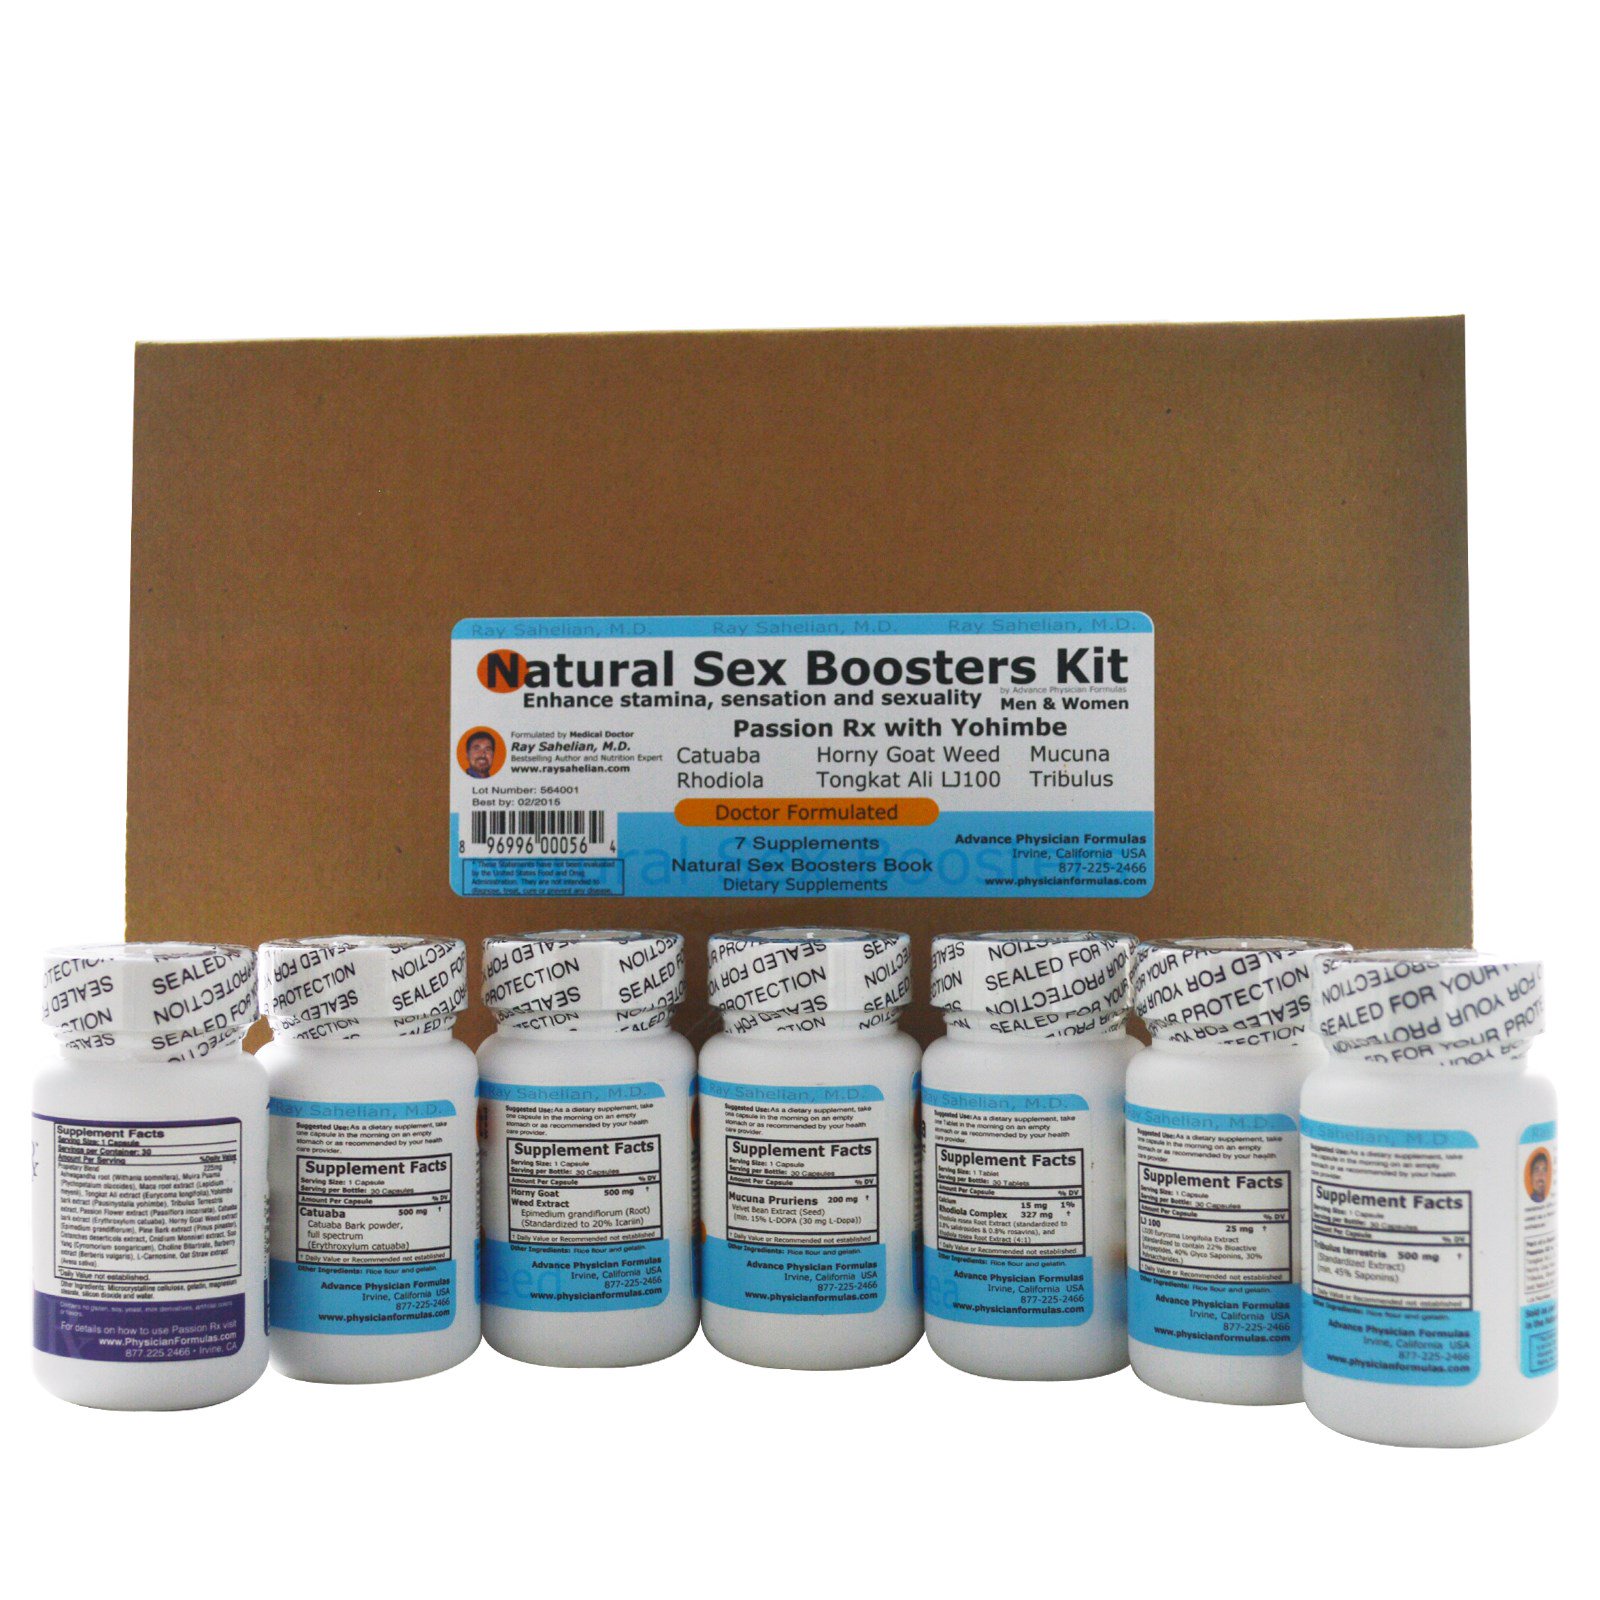 Advance Physician Formulas Natural Sex Boosters Kit 8 Piece Kit Iherb 5725